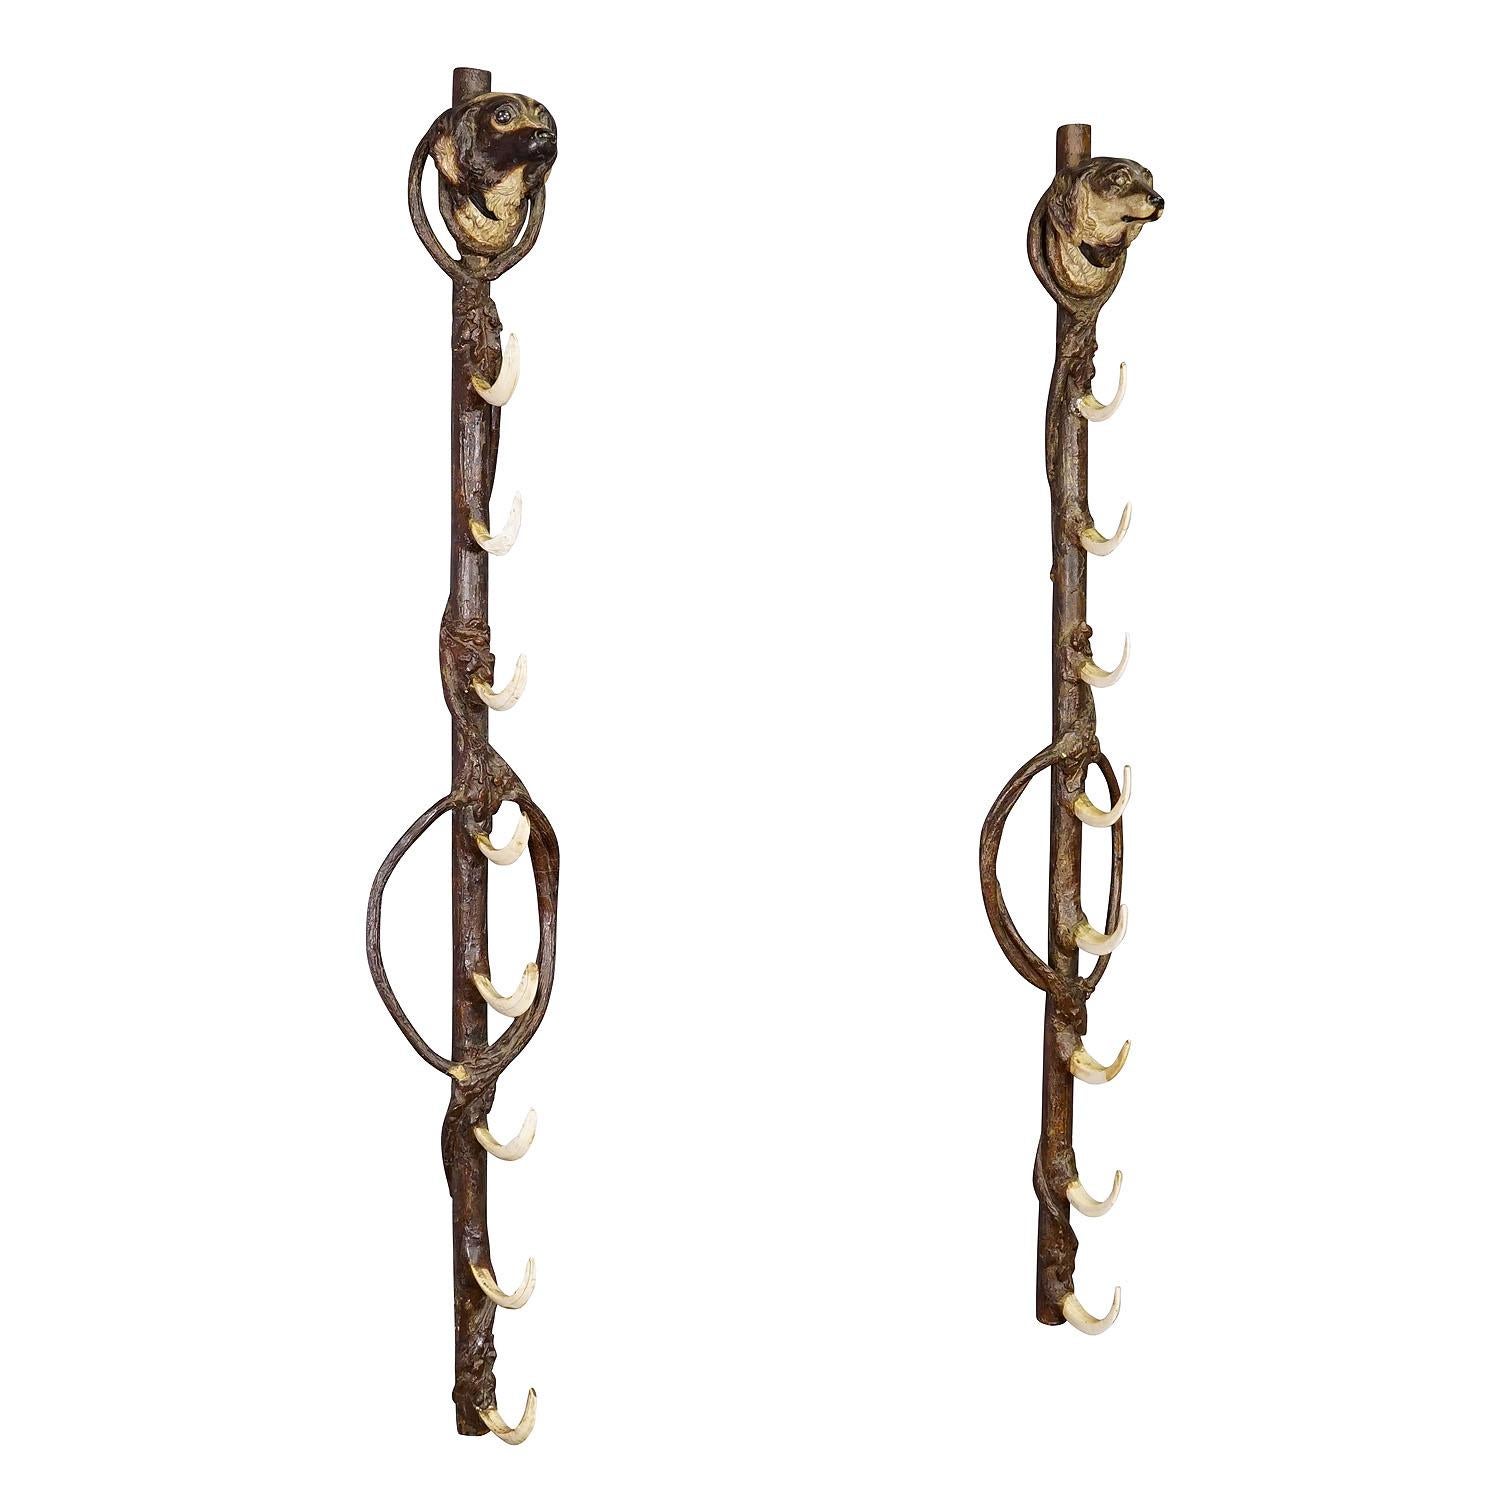 A Pair Antique Black Forest Gun Holders, Austria late 19th Century

An antique pair of Black Forest gun holders mounted side by side on the wall. They consist of a wooden rod covered with resin decorations depicting oak leaves. The rifles are held